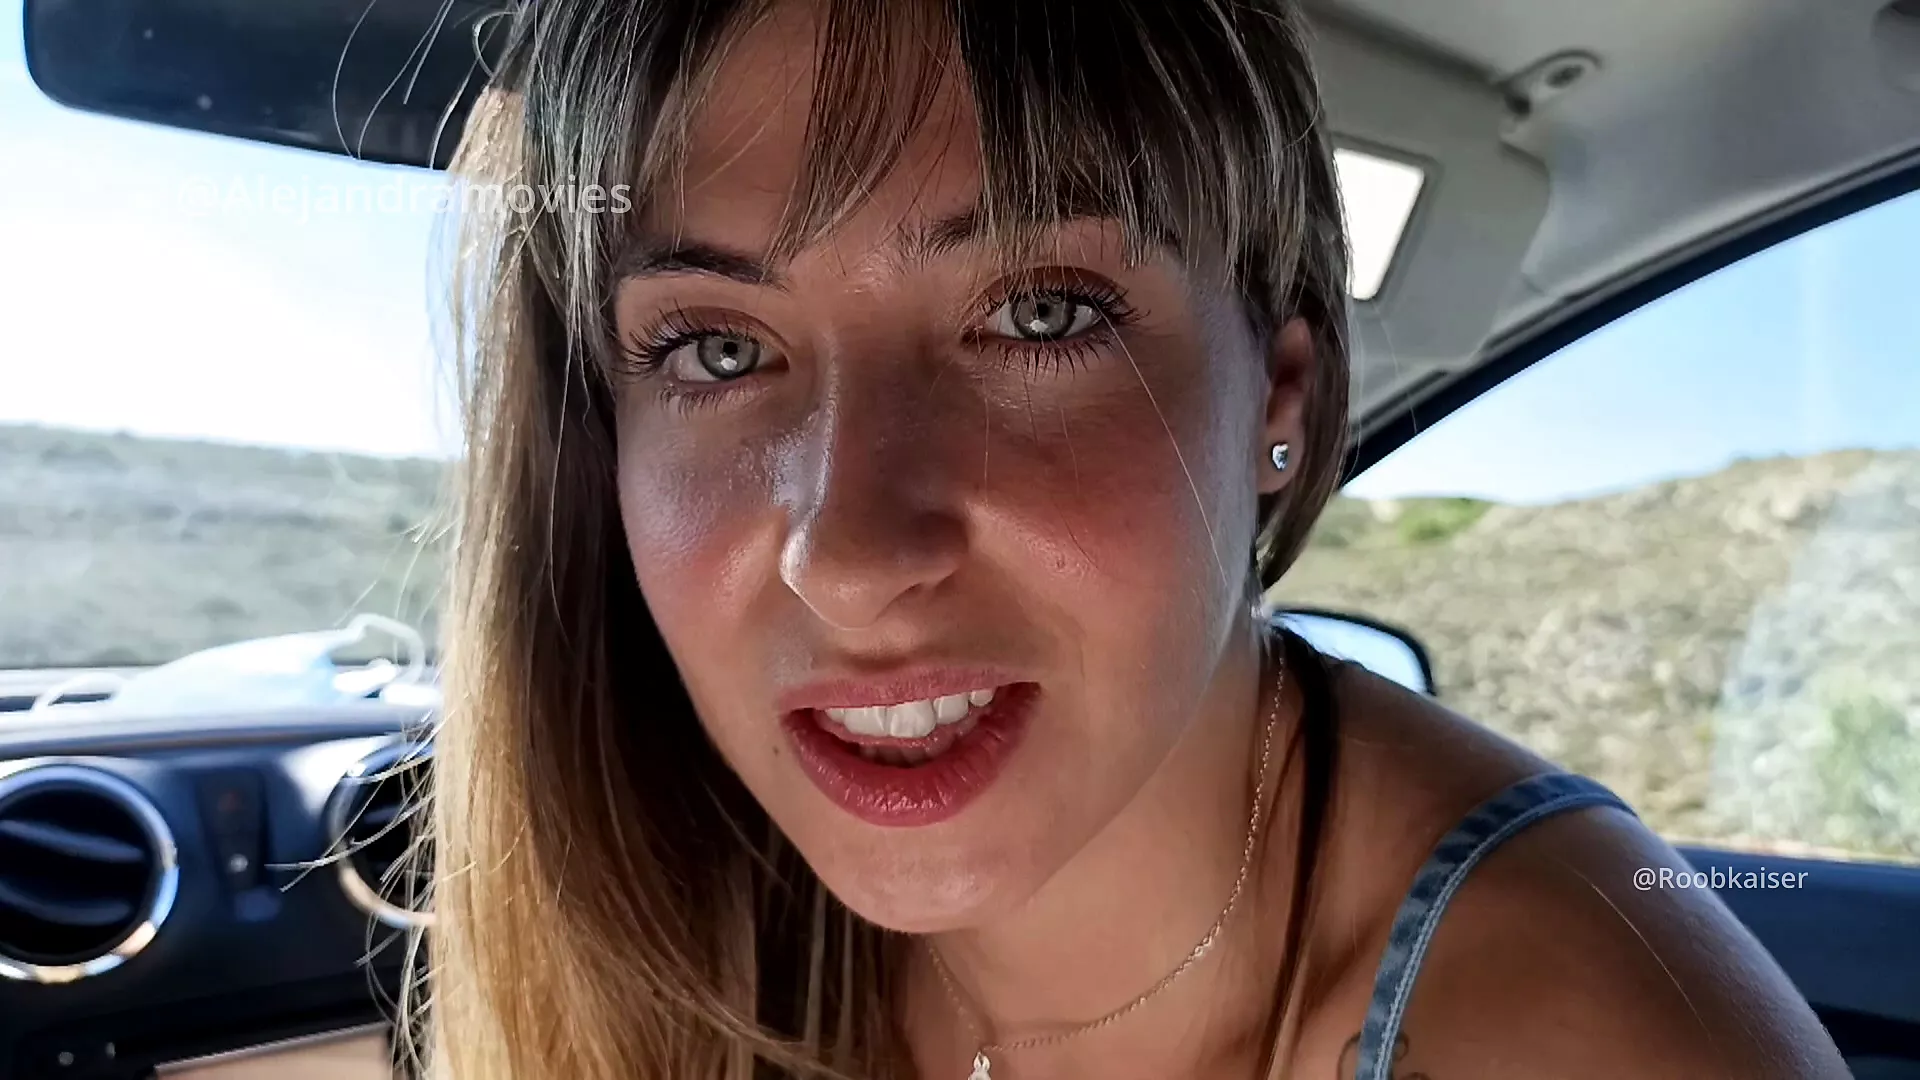 Oral sex with a stranger in the car, I suck his cock in the car in public photo